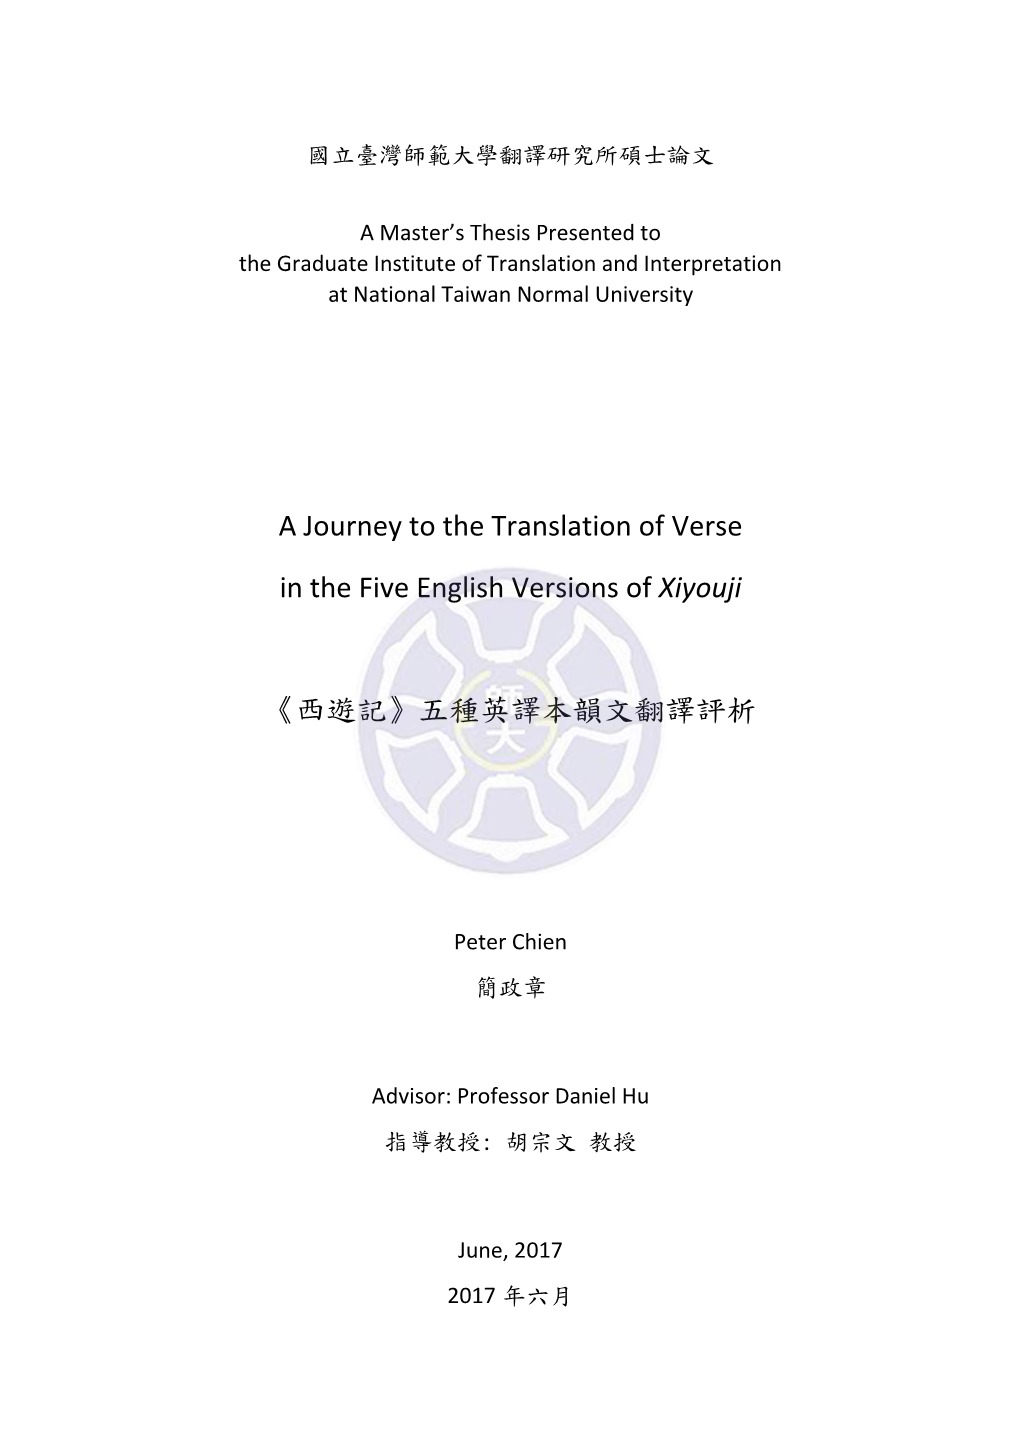 A Journey to the Translation of Verse in the Five English Versions of Xiyouji